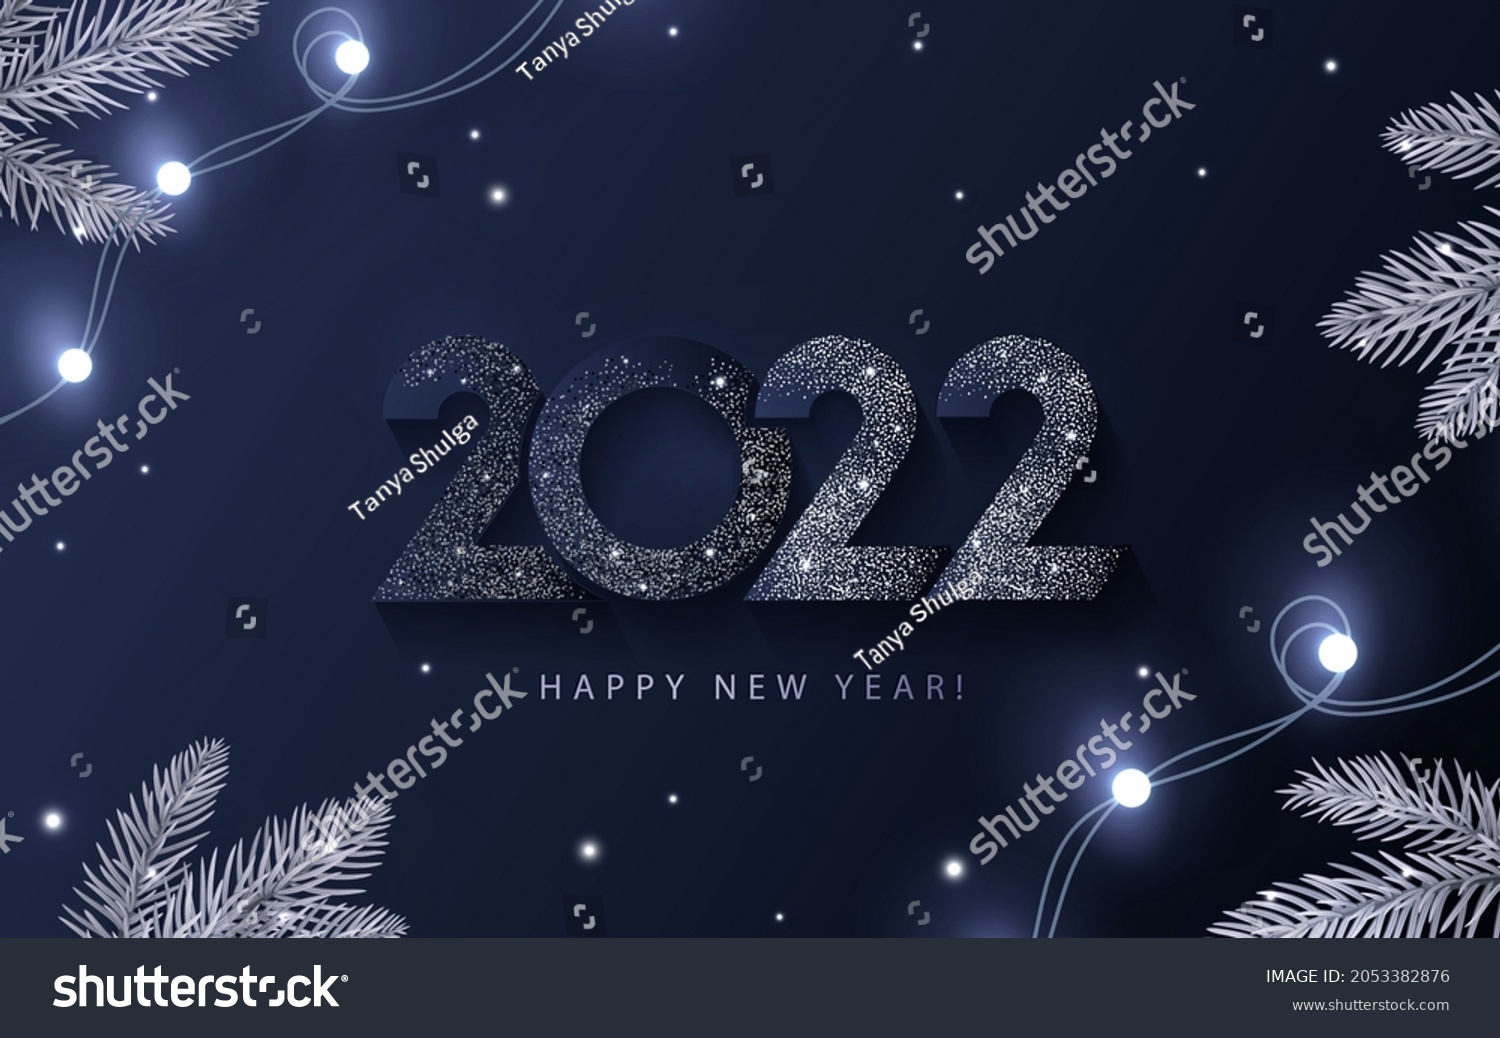 Happy New Year 2022 beautiful sparkling design of numbers on dark blue background with lights, pine branches and shining falling snow. Trendy modern winter banner, poster or greeting card template #2053382876